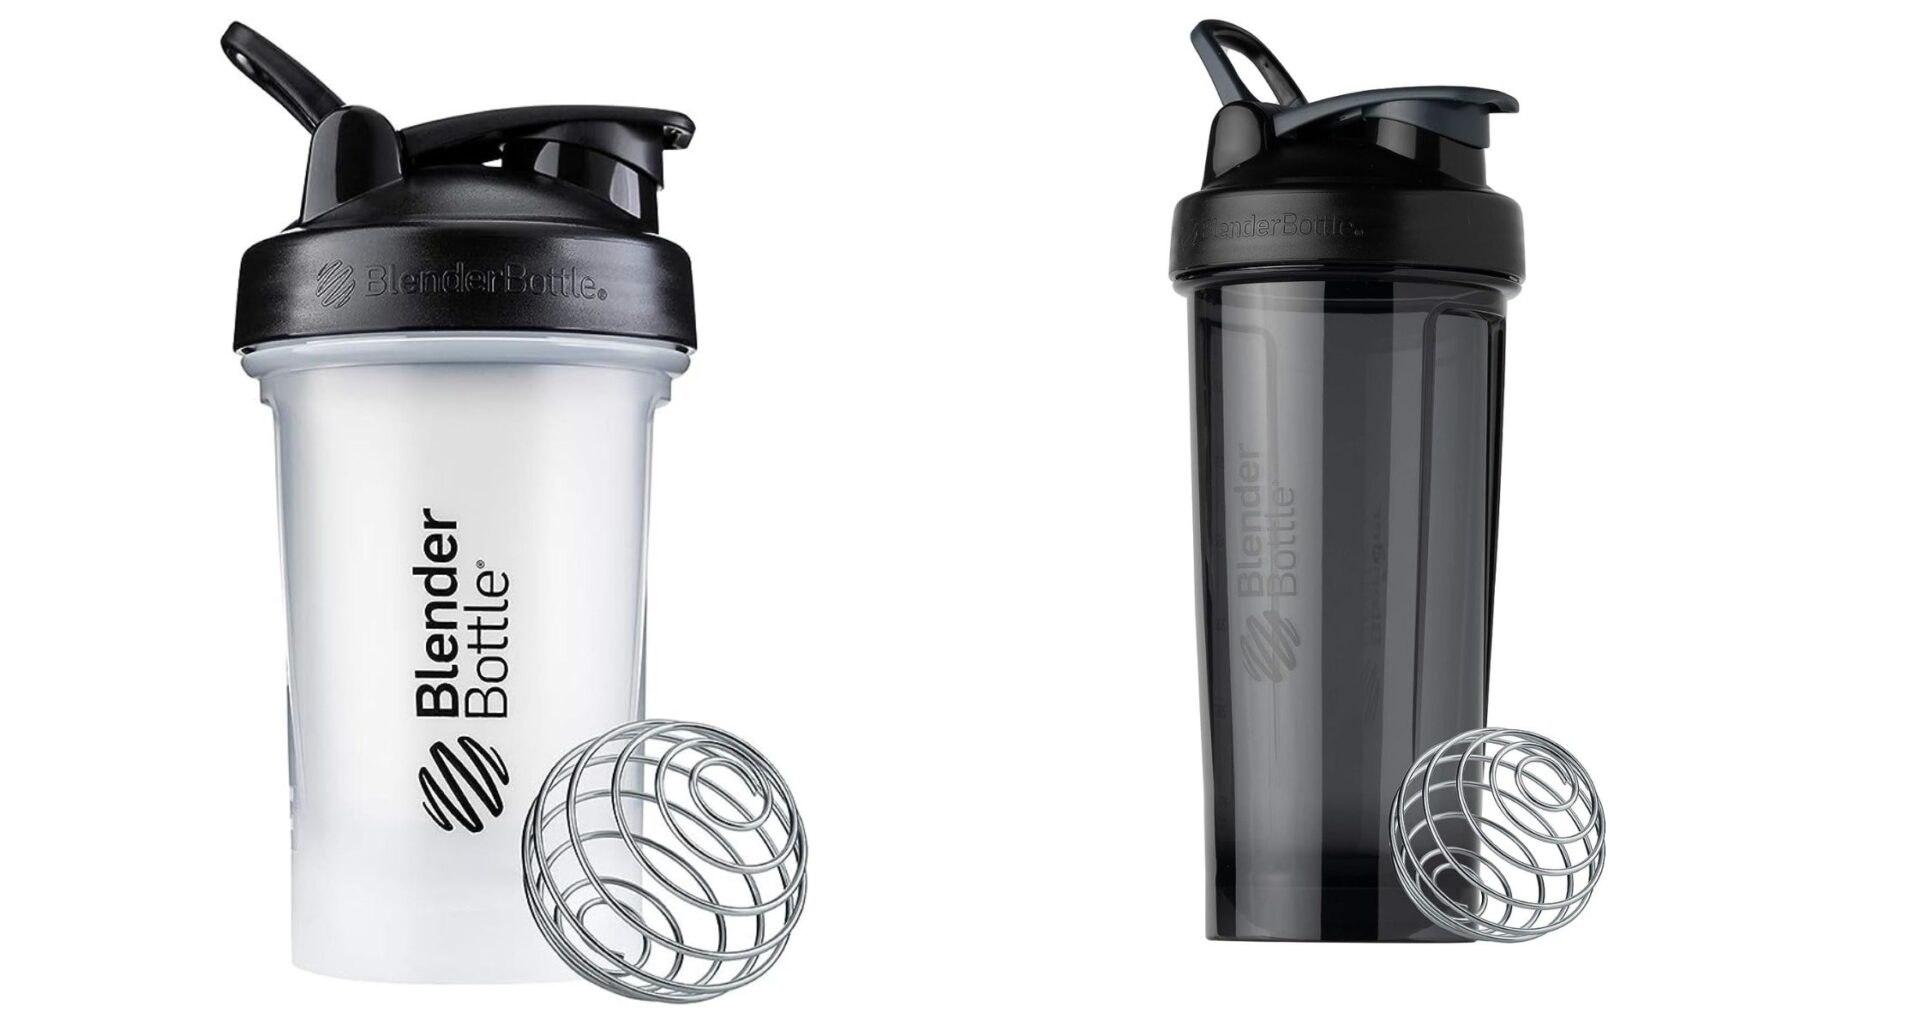 Blender Bottle Classic Vs Pro - Which One is Better?